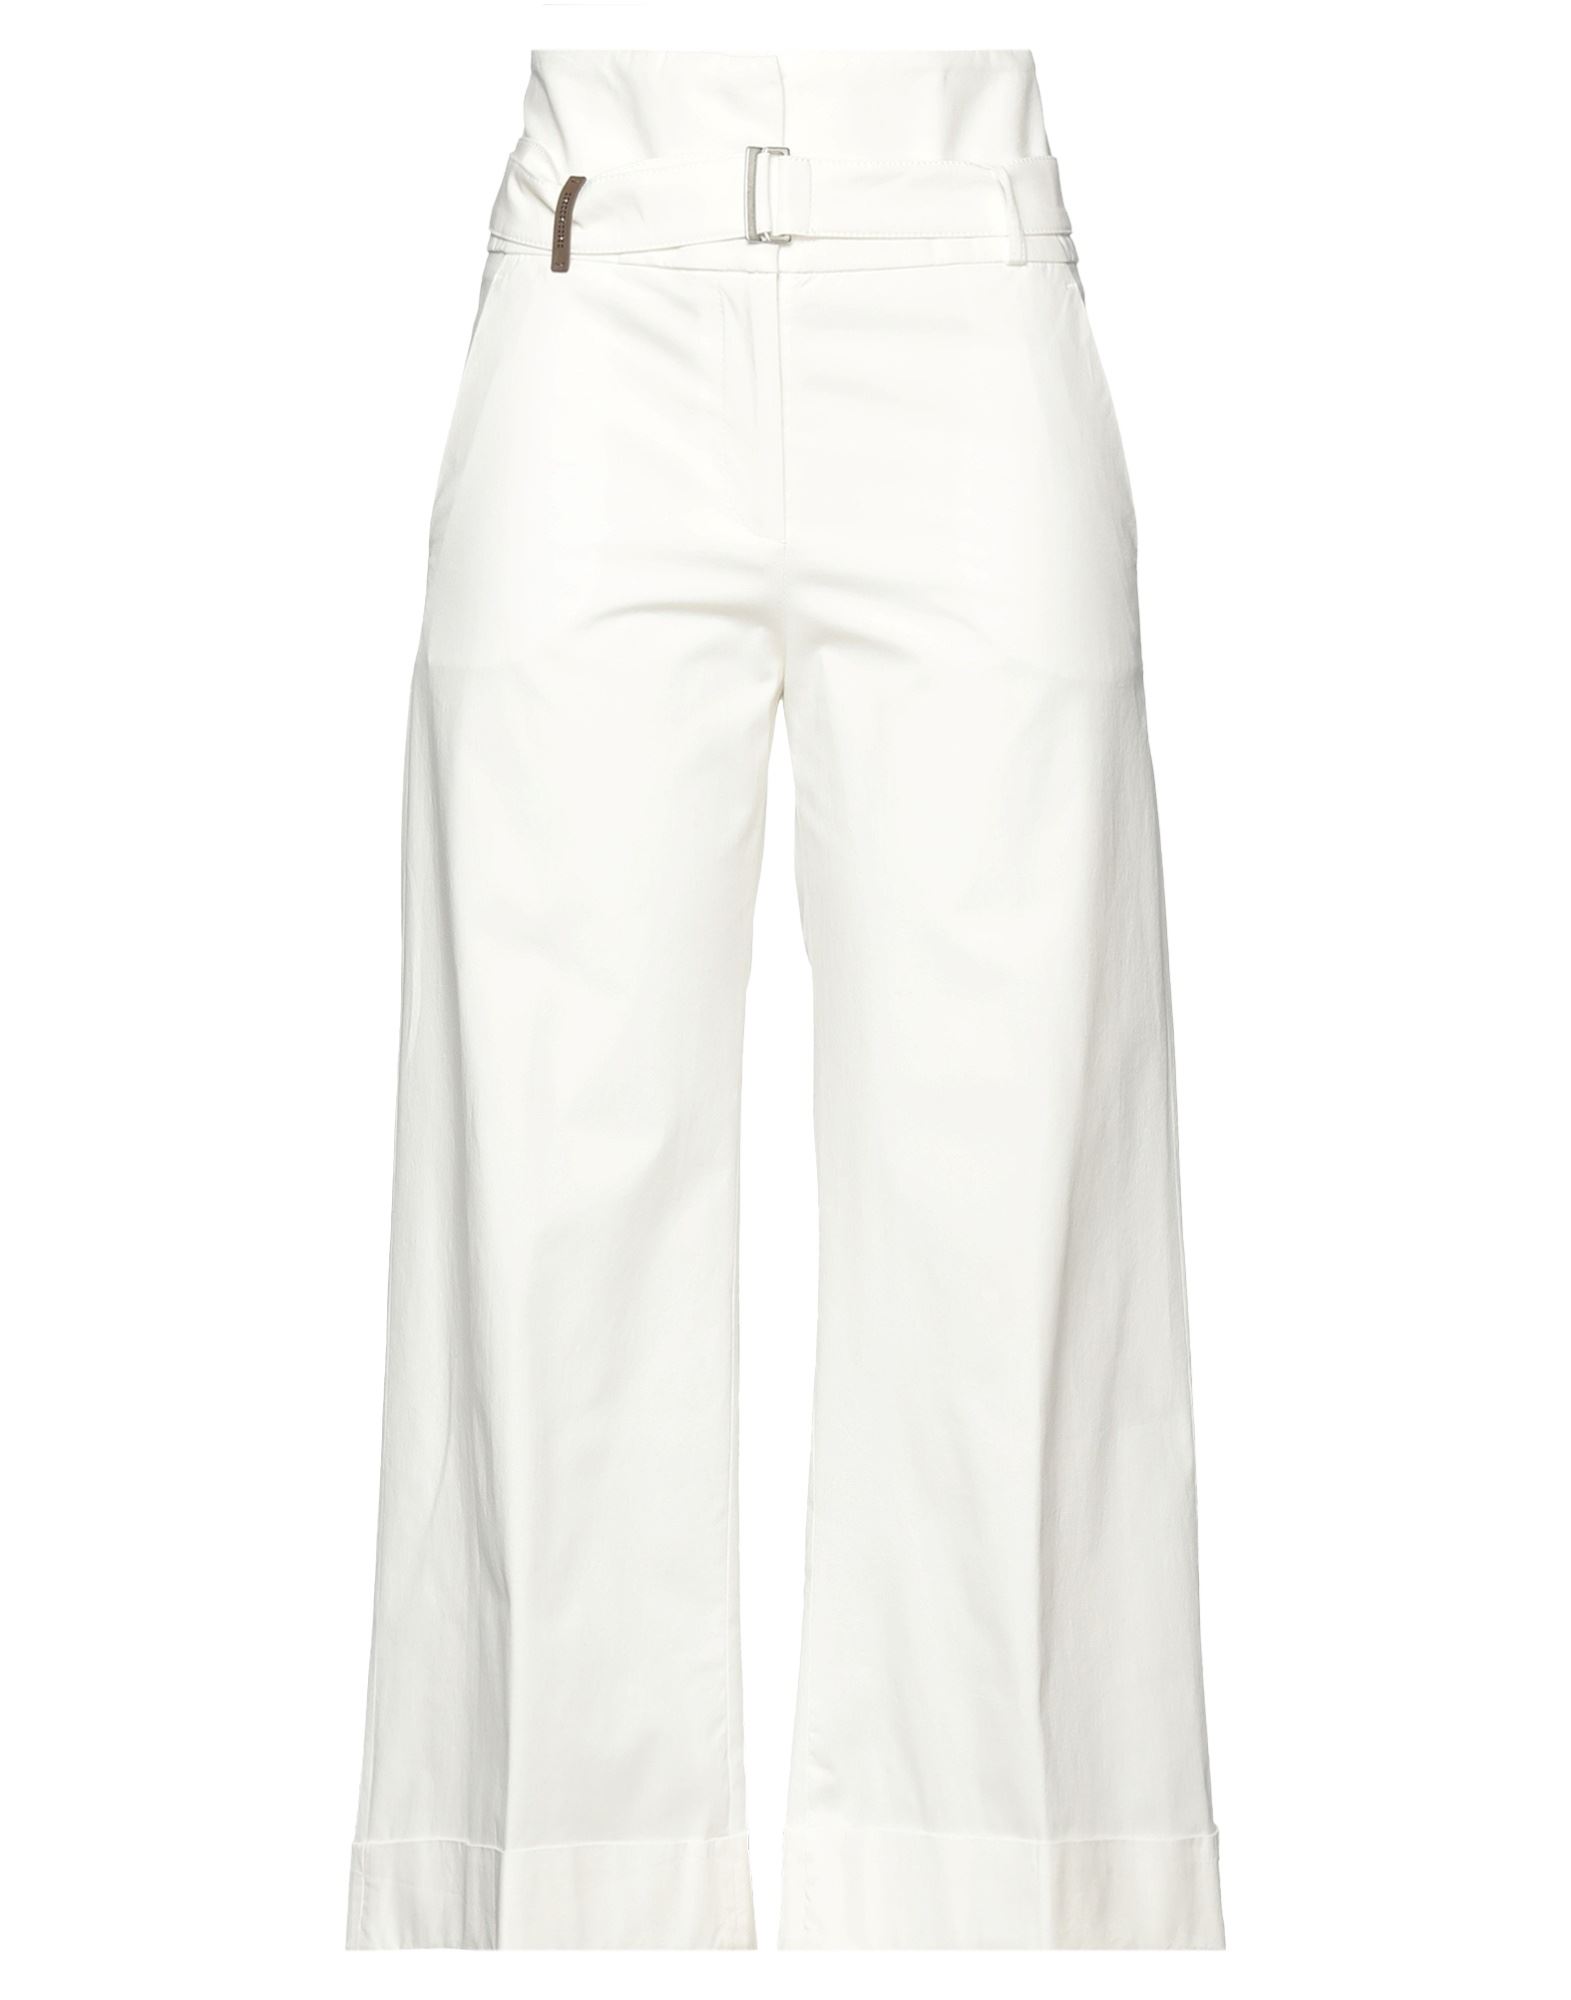 Accuà By Psr Pants In White